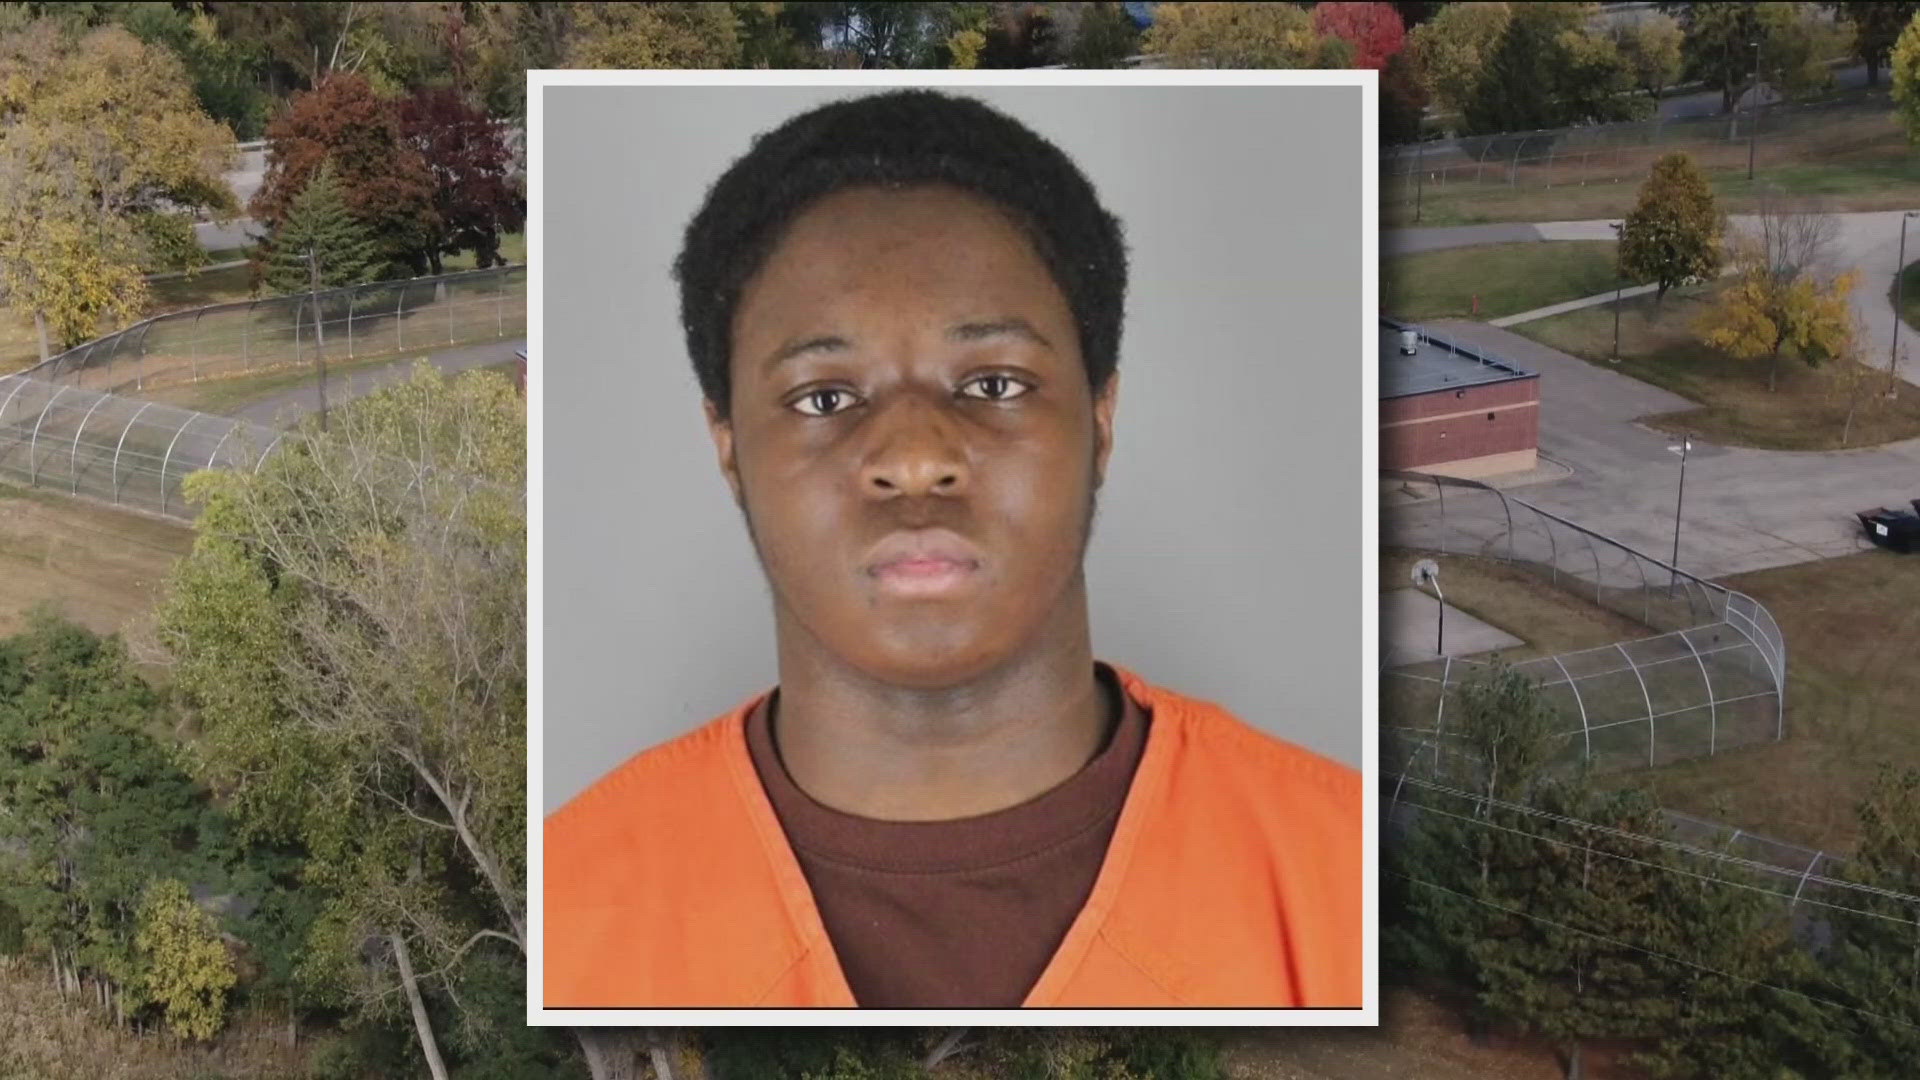 Foday Kamara admitted in March to kicking down the door of her apartment and shooting McKeever.